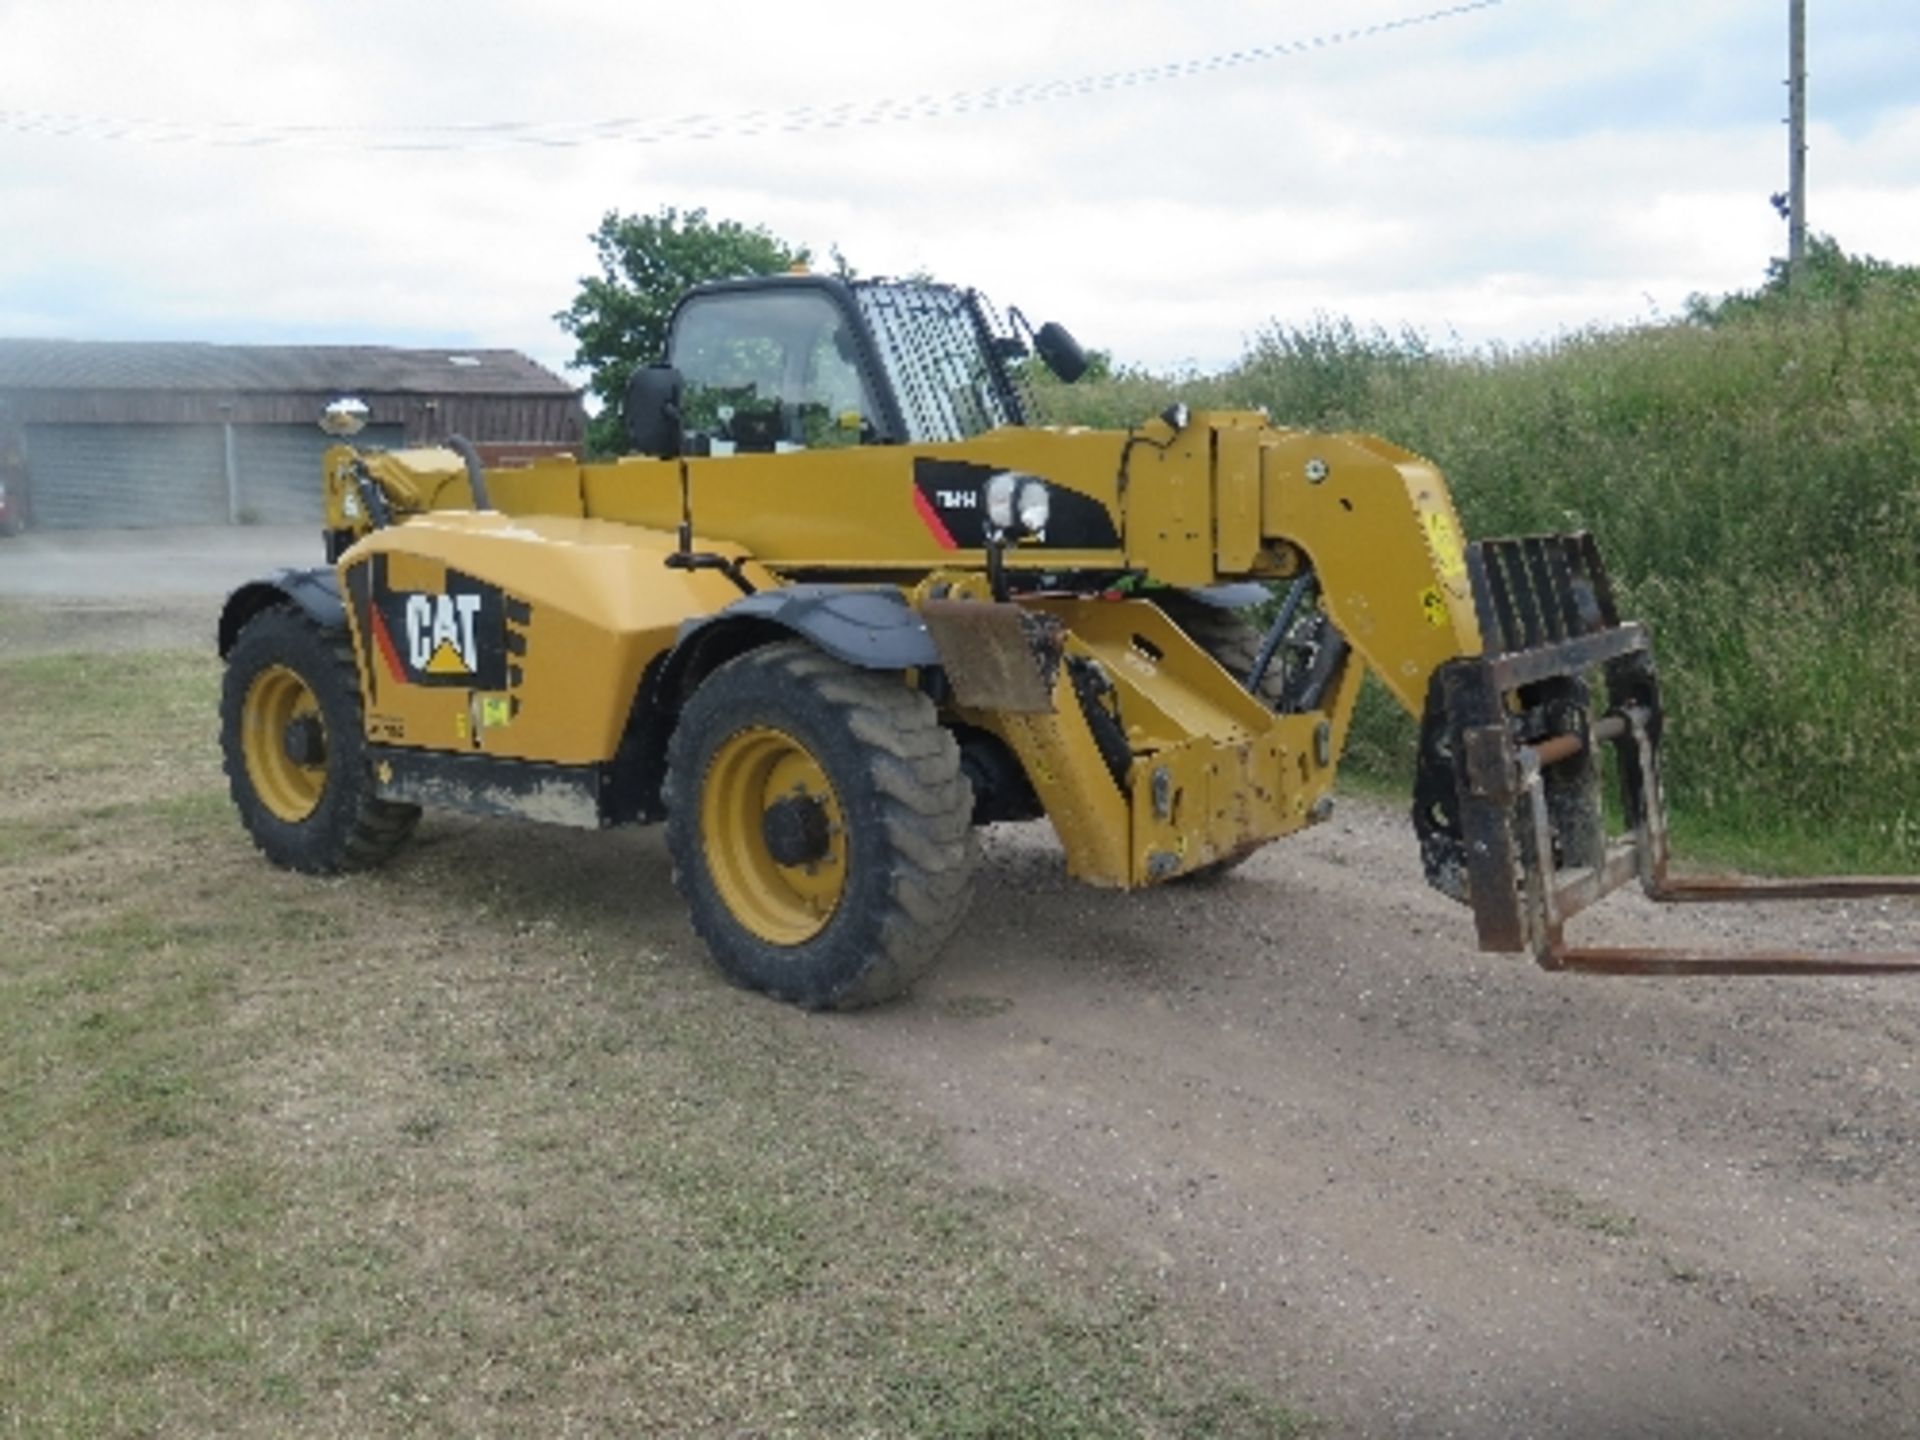 Caterpillar TH414STD telehandler 2680 hrs 2011 TBZ00712
This lot is included by kind permission - Image 2 of 7